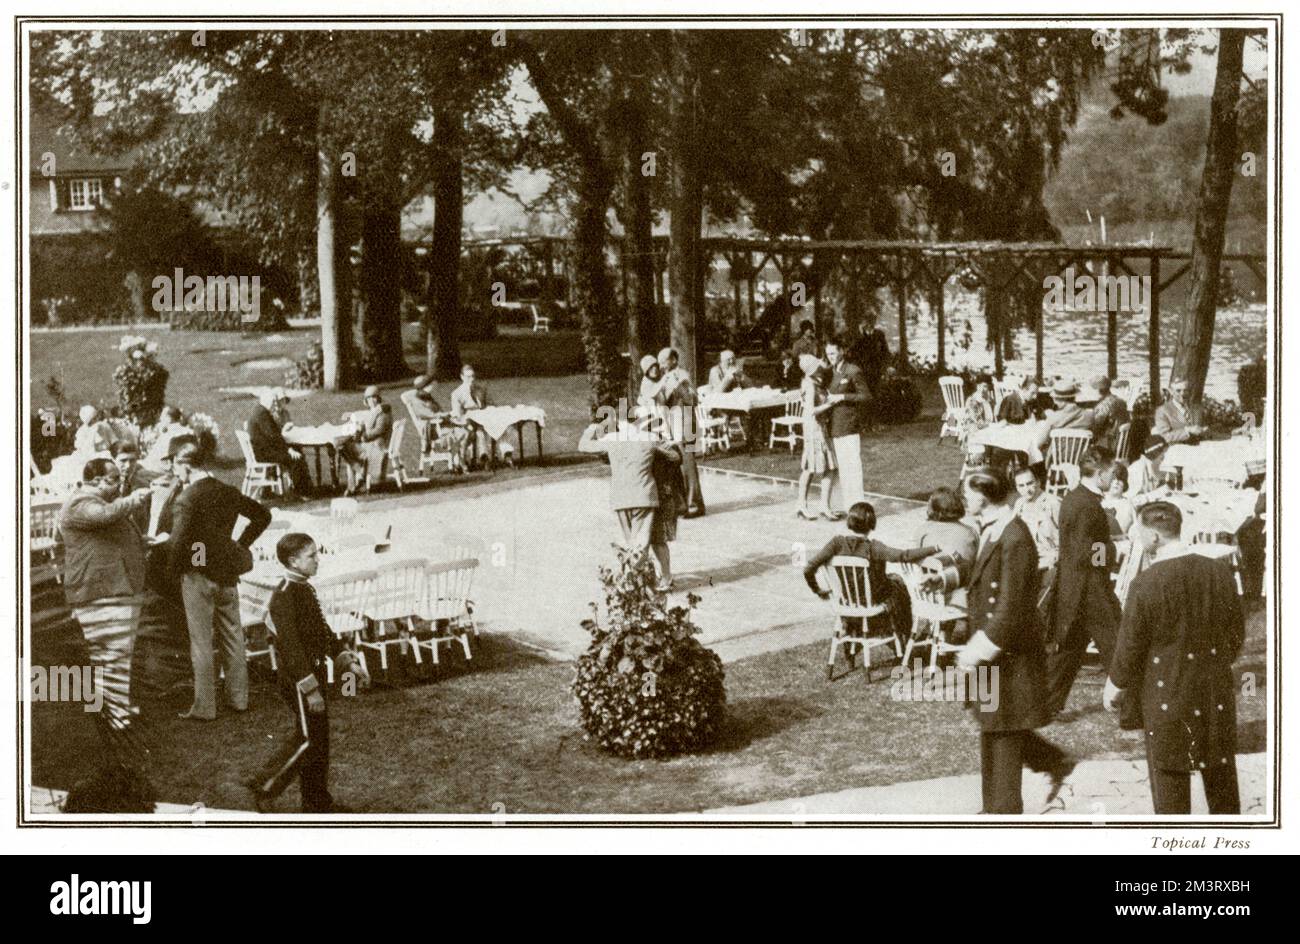 View of the glass dance floor in the grounds of the Hungaria Restaurant Club at Maidenhead, formerly Murray's River Club.  The venue also boasted an excellent ballroom, American bar, a verandah where one could dine, a miniature golf course and croquet lawns.  Divine!     Date: 1929 Stock Photo